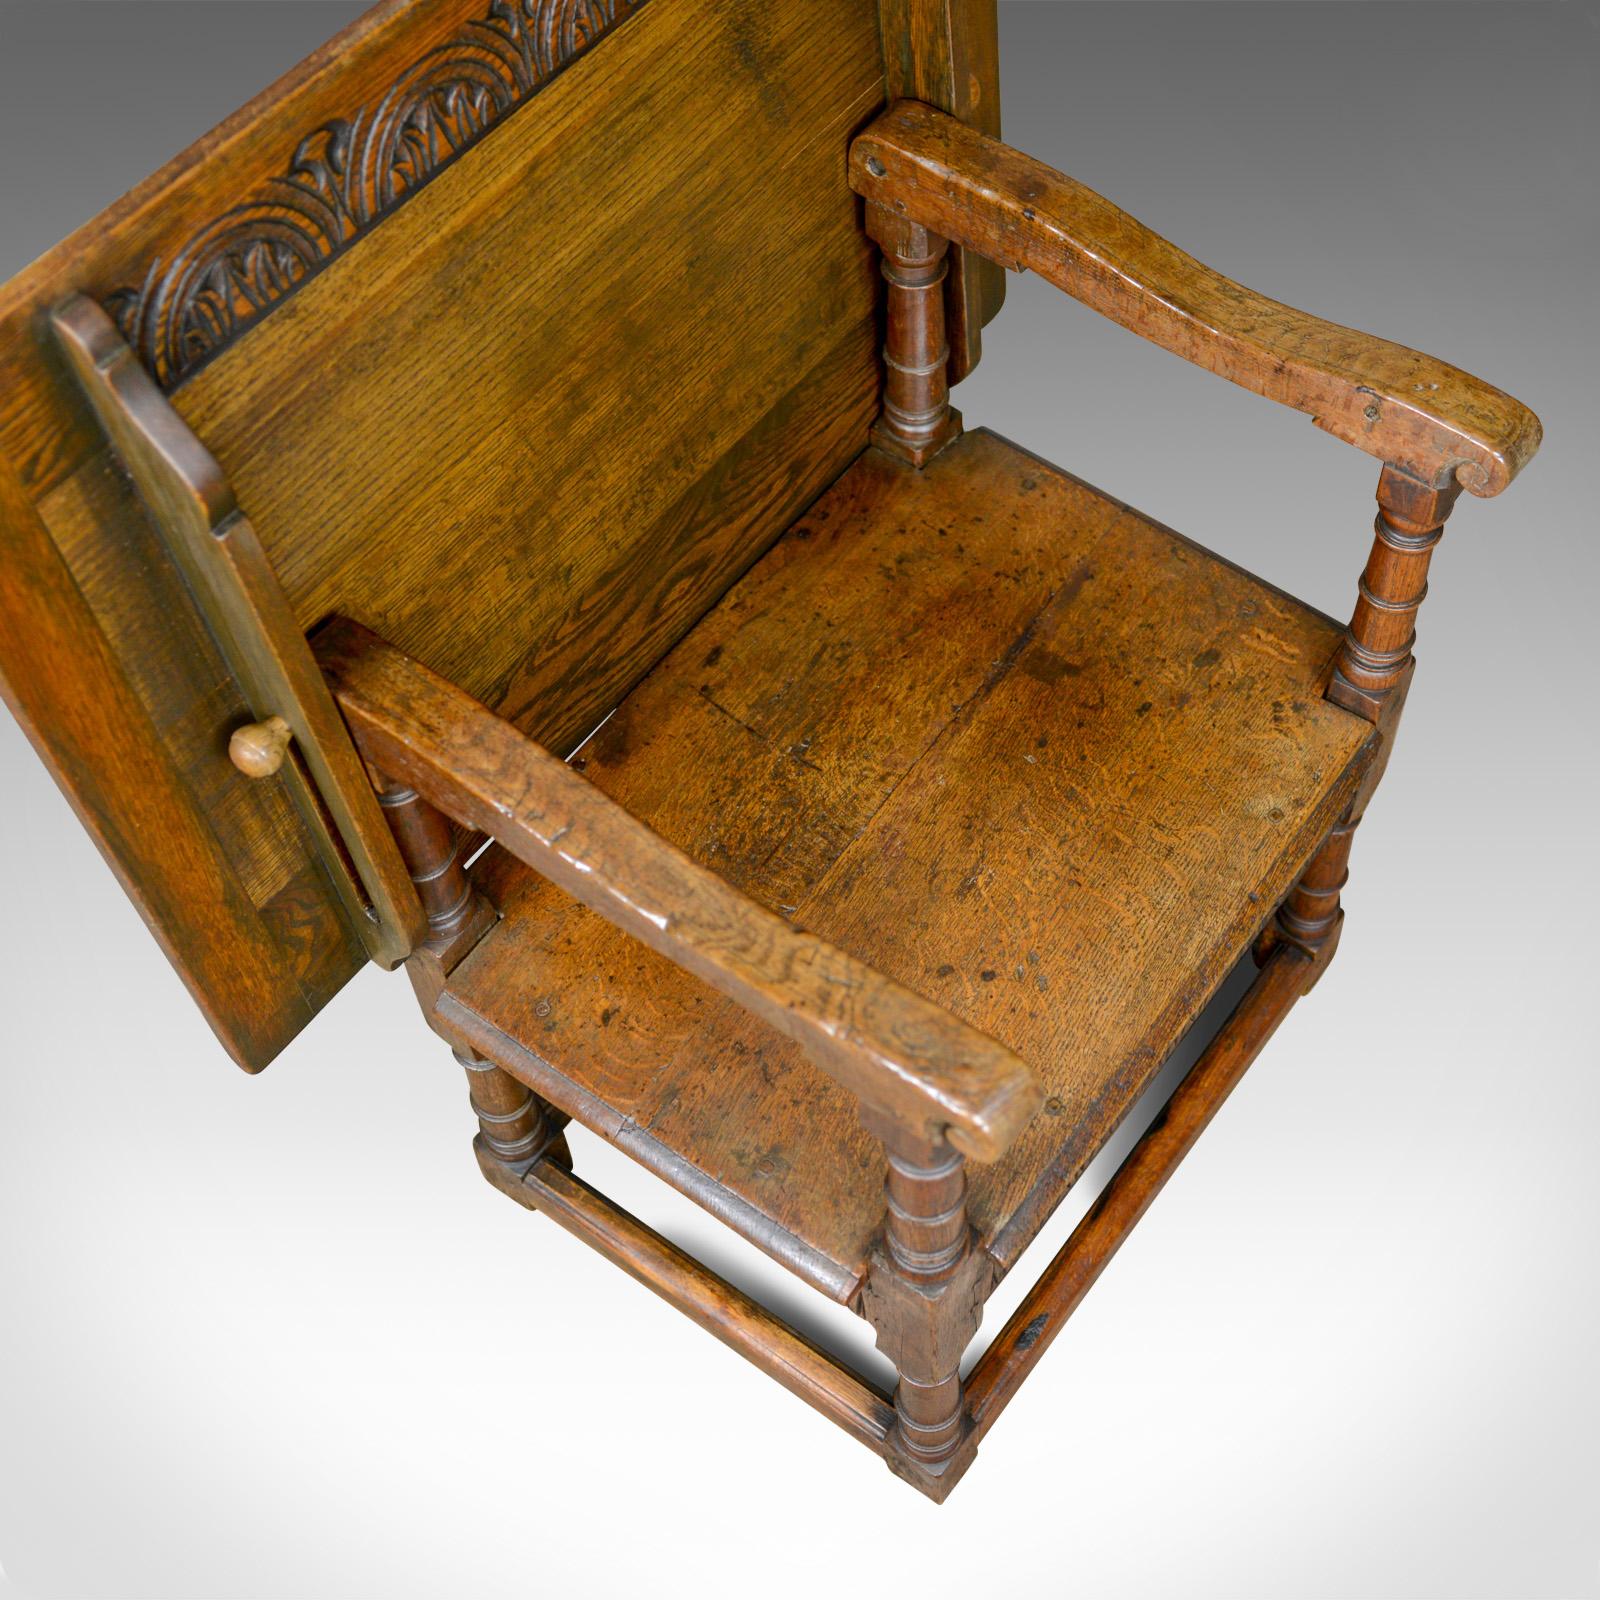 Antique Monk's Bench Metamorphic Table Chair English Oak, 18th Century and Later 1